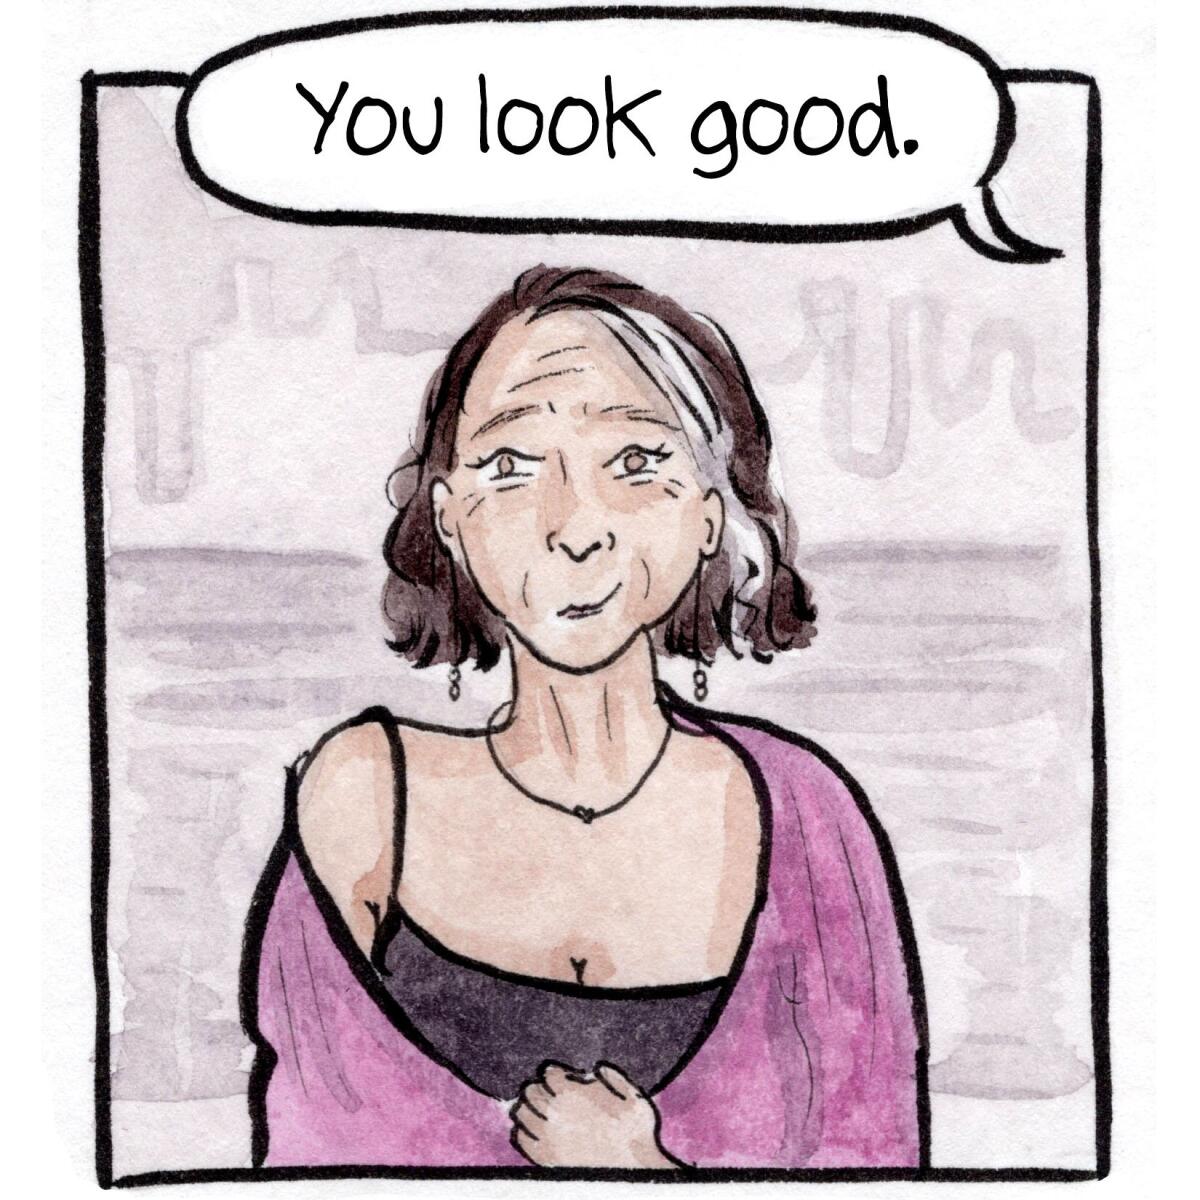 Someone says, "You look well," to a woman with a pink shawl and a streak of gray hair.